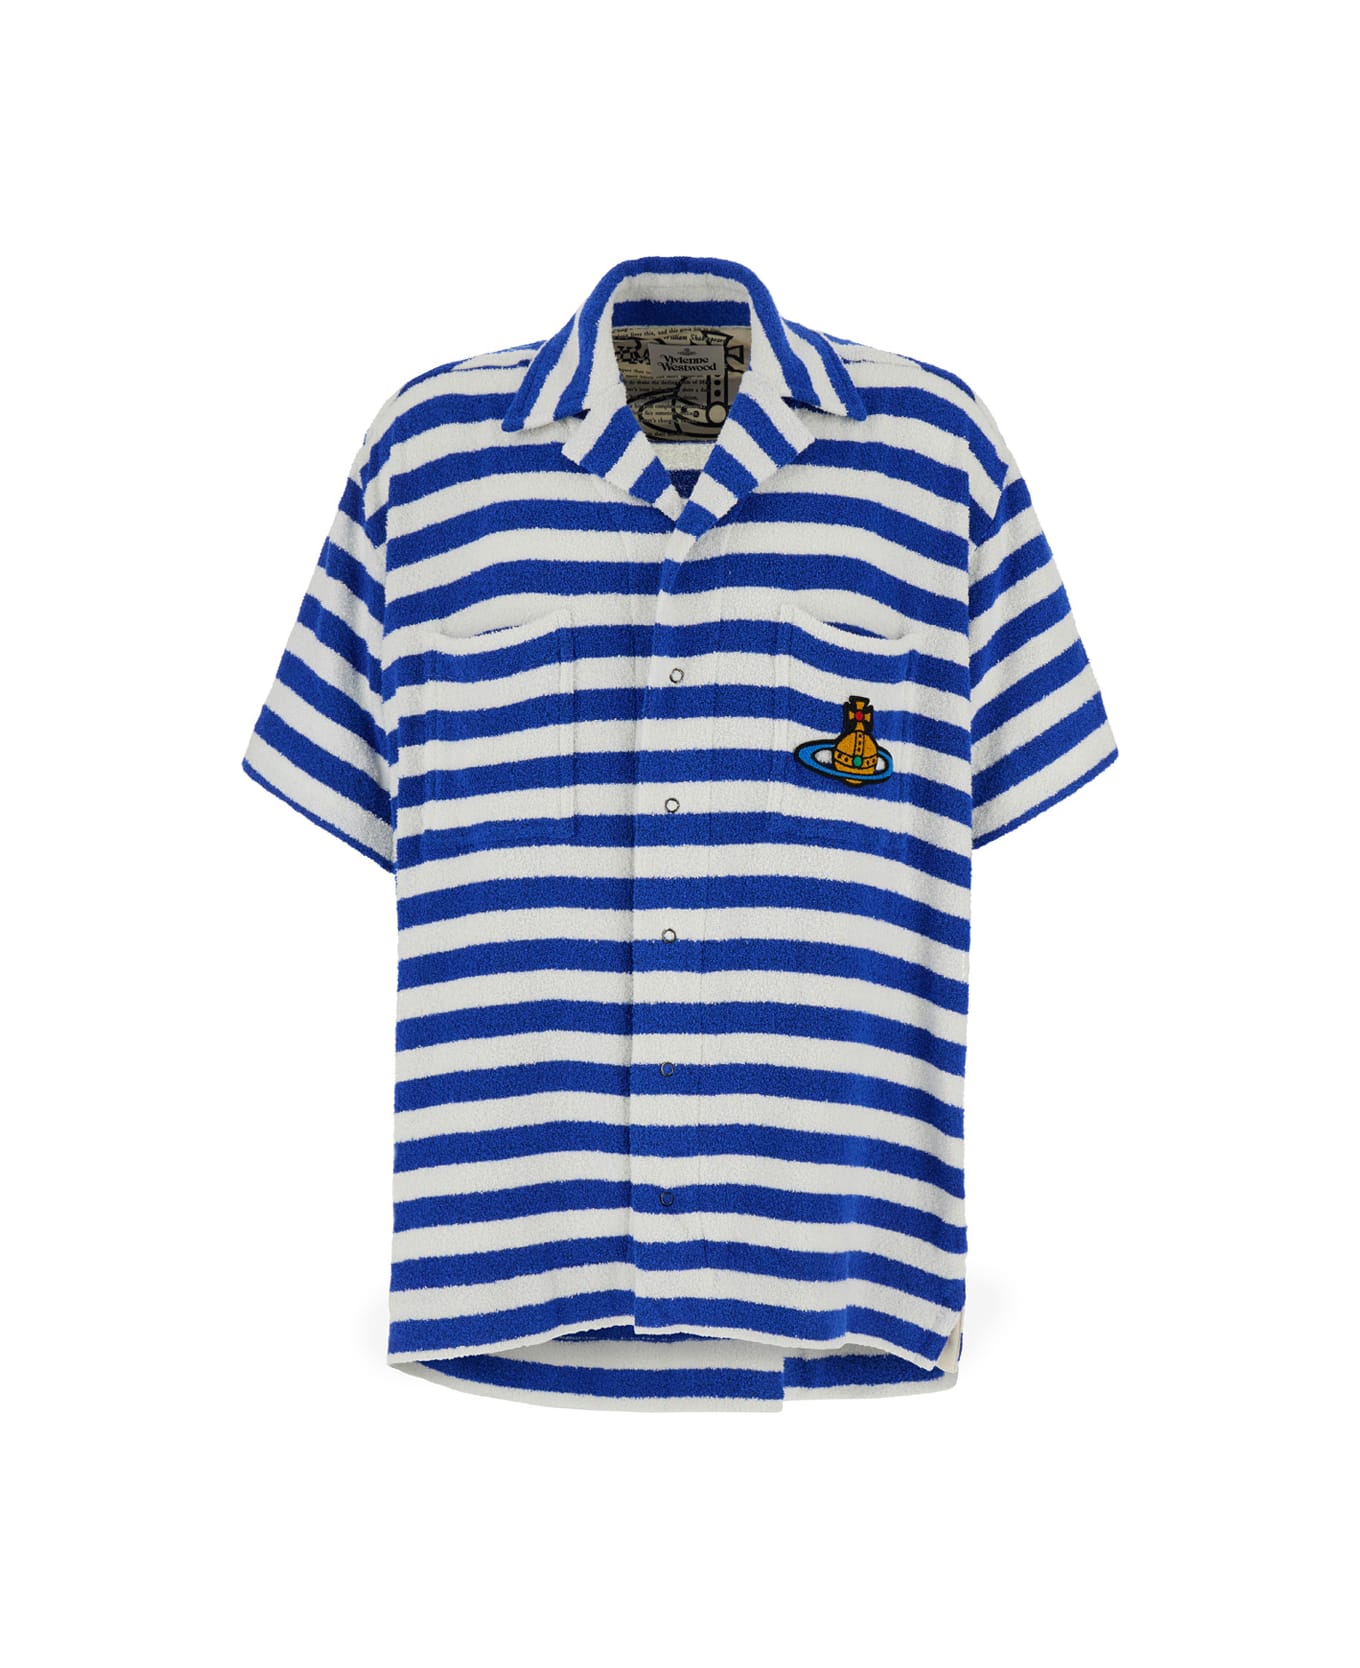 Vivienne Westwood Blue And White Striped Bowling Shirt With Orb Embroidery In Cotton Blend Man - Blu